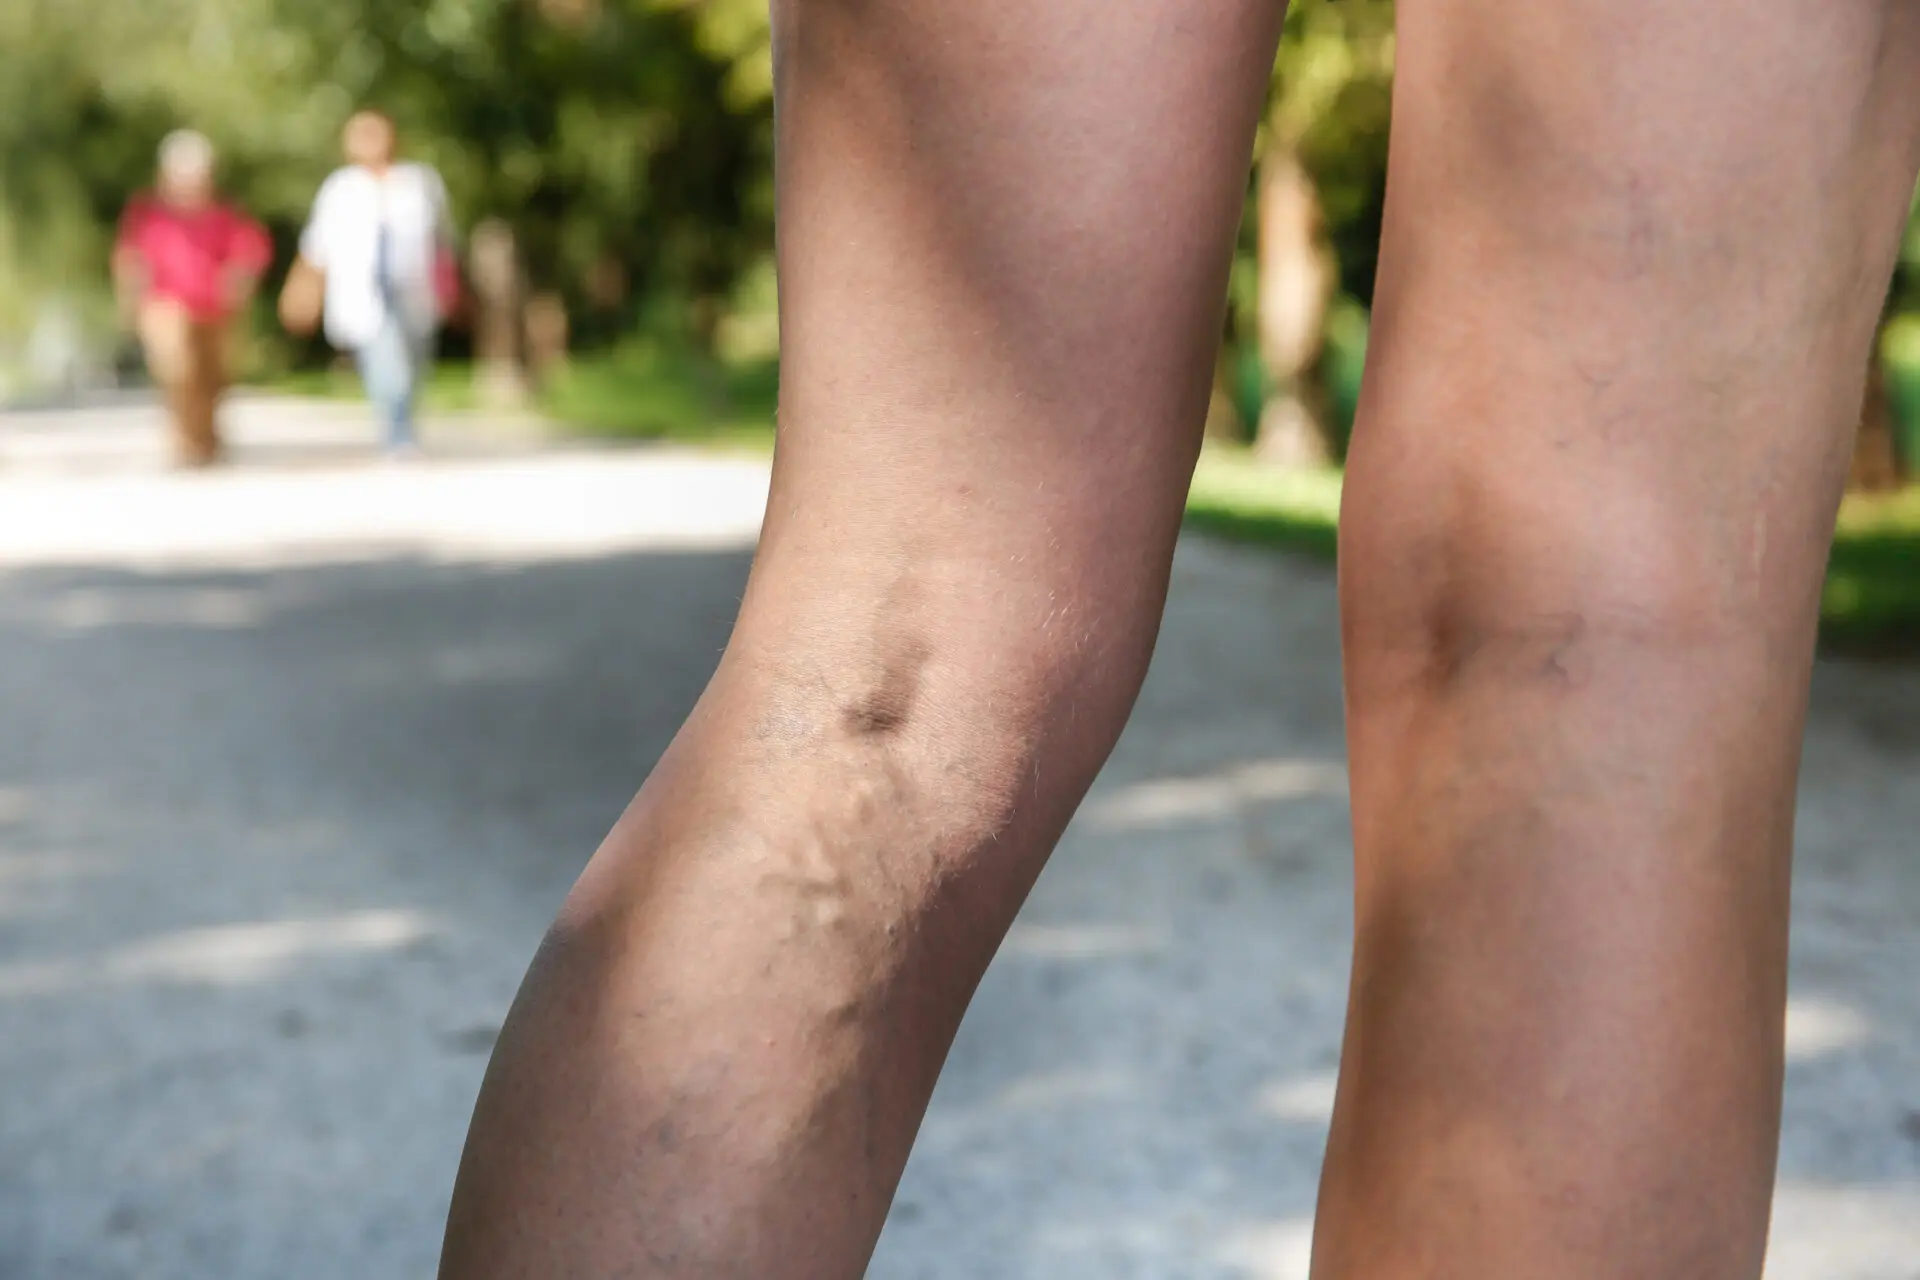 Varicose veins: When to worry and why